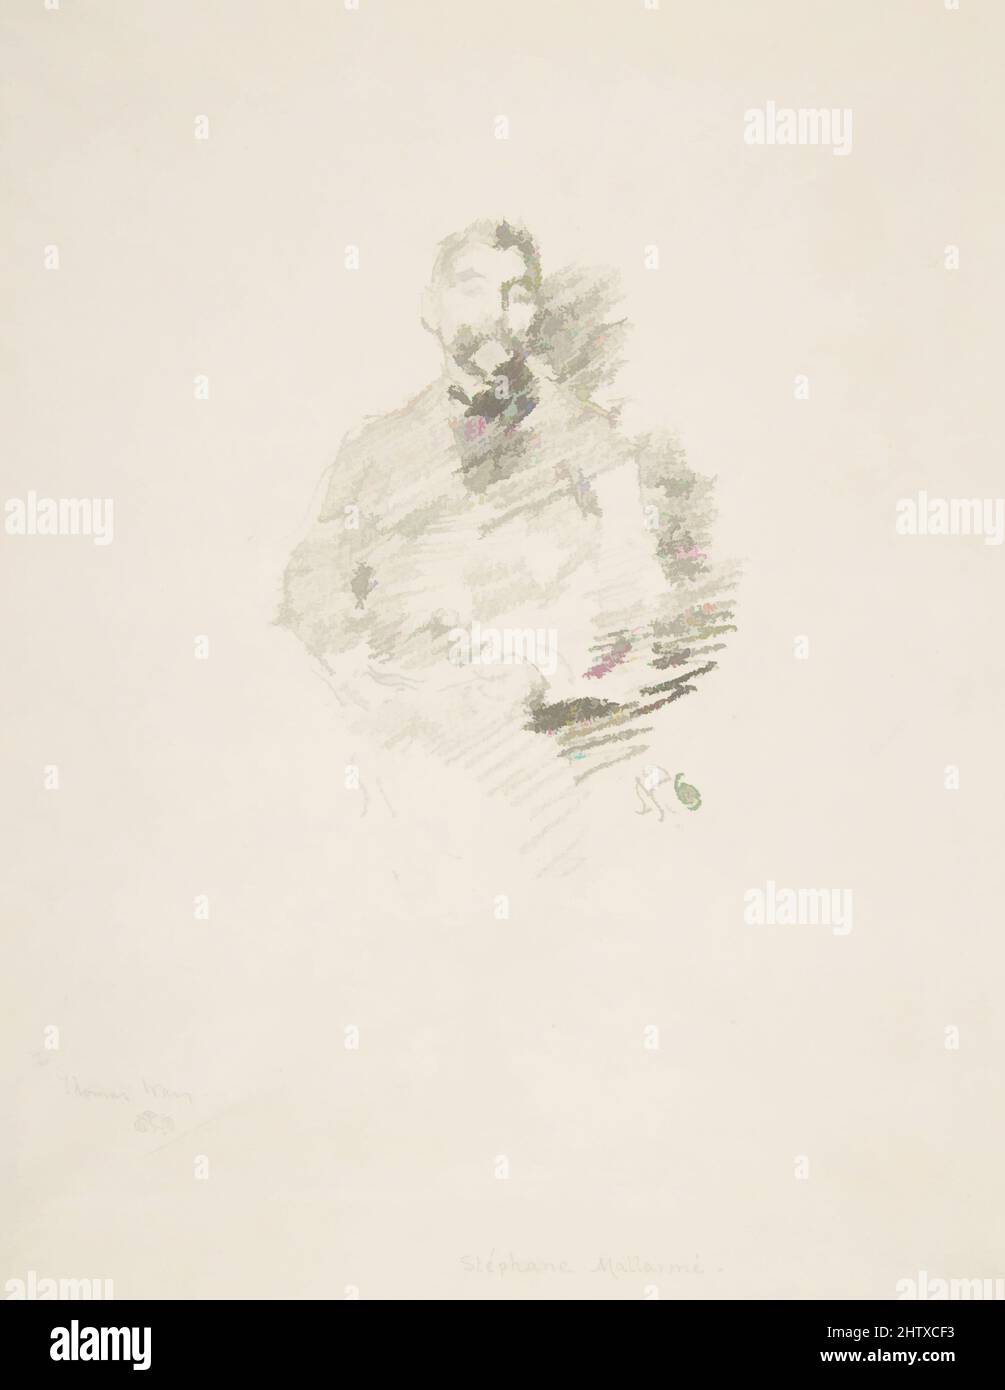 Art inspired by Stéphane Mallarmé, 1892, Transfer lithograph, drawn on thin, transparent transfer paper; only state (Chicago); printed in gray-black ink on ivory laid paper, Image: 3 13/16 × 2 3/4 in. (9.7 × 7 cm), Prints, James McNeill Whistler (American, Lowell, Massachusetts 1834–, Classic works modernized by Artotop with a splash of modernity. Shapes, color and value, eye-catching visual impact on art. Emotions through freedom of artworks in a contemporary way. A timeless message pursuing a wildly creative new direction. Artists turning to the digital medium and creating the Artotop NFT Stock Photo